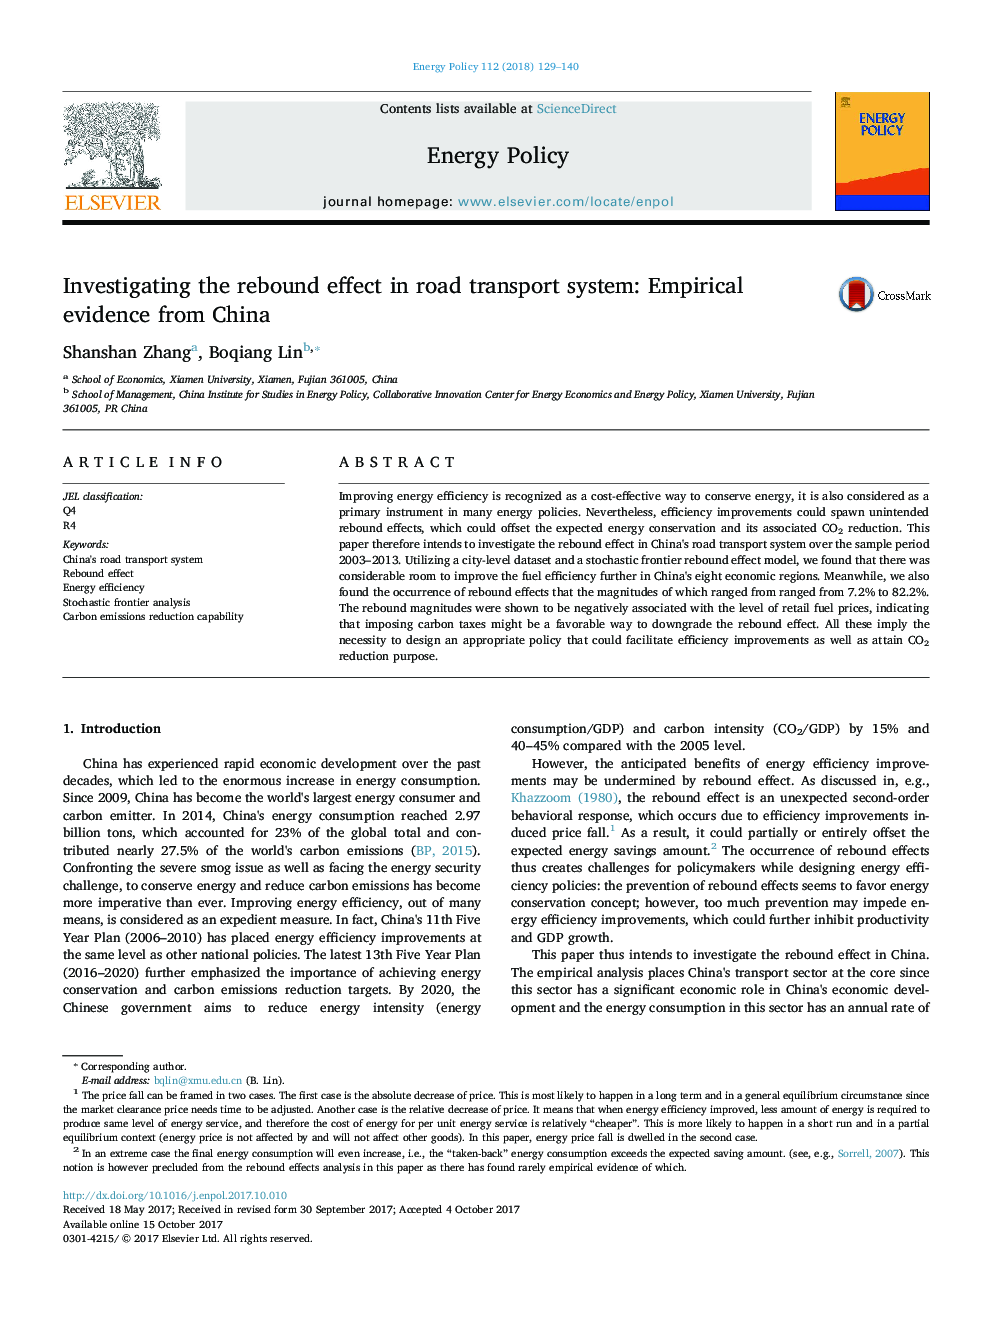 Investigating the rebound effect in road transport system: Empirical evidence from China